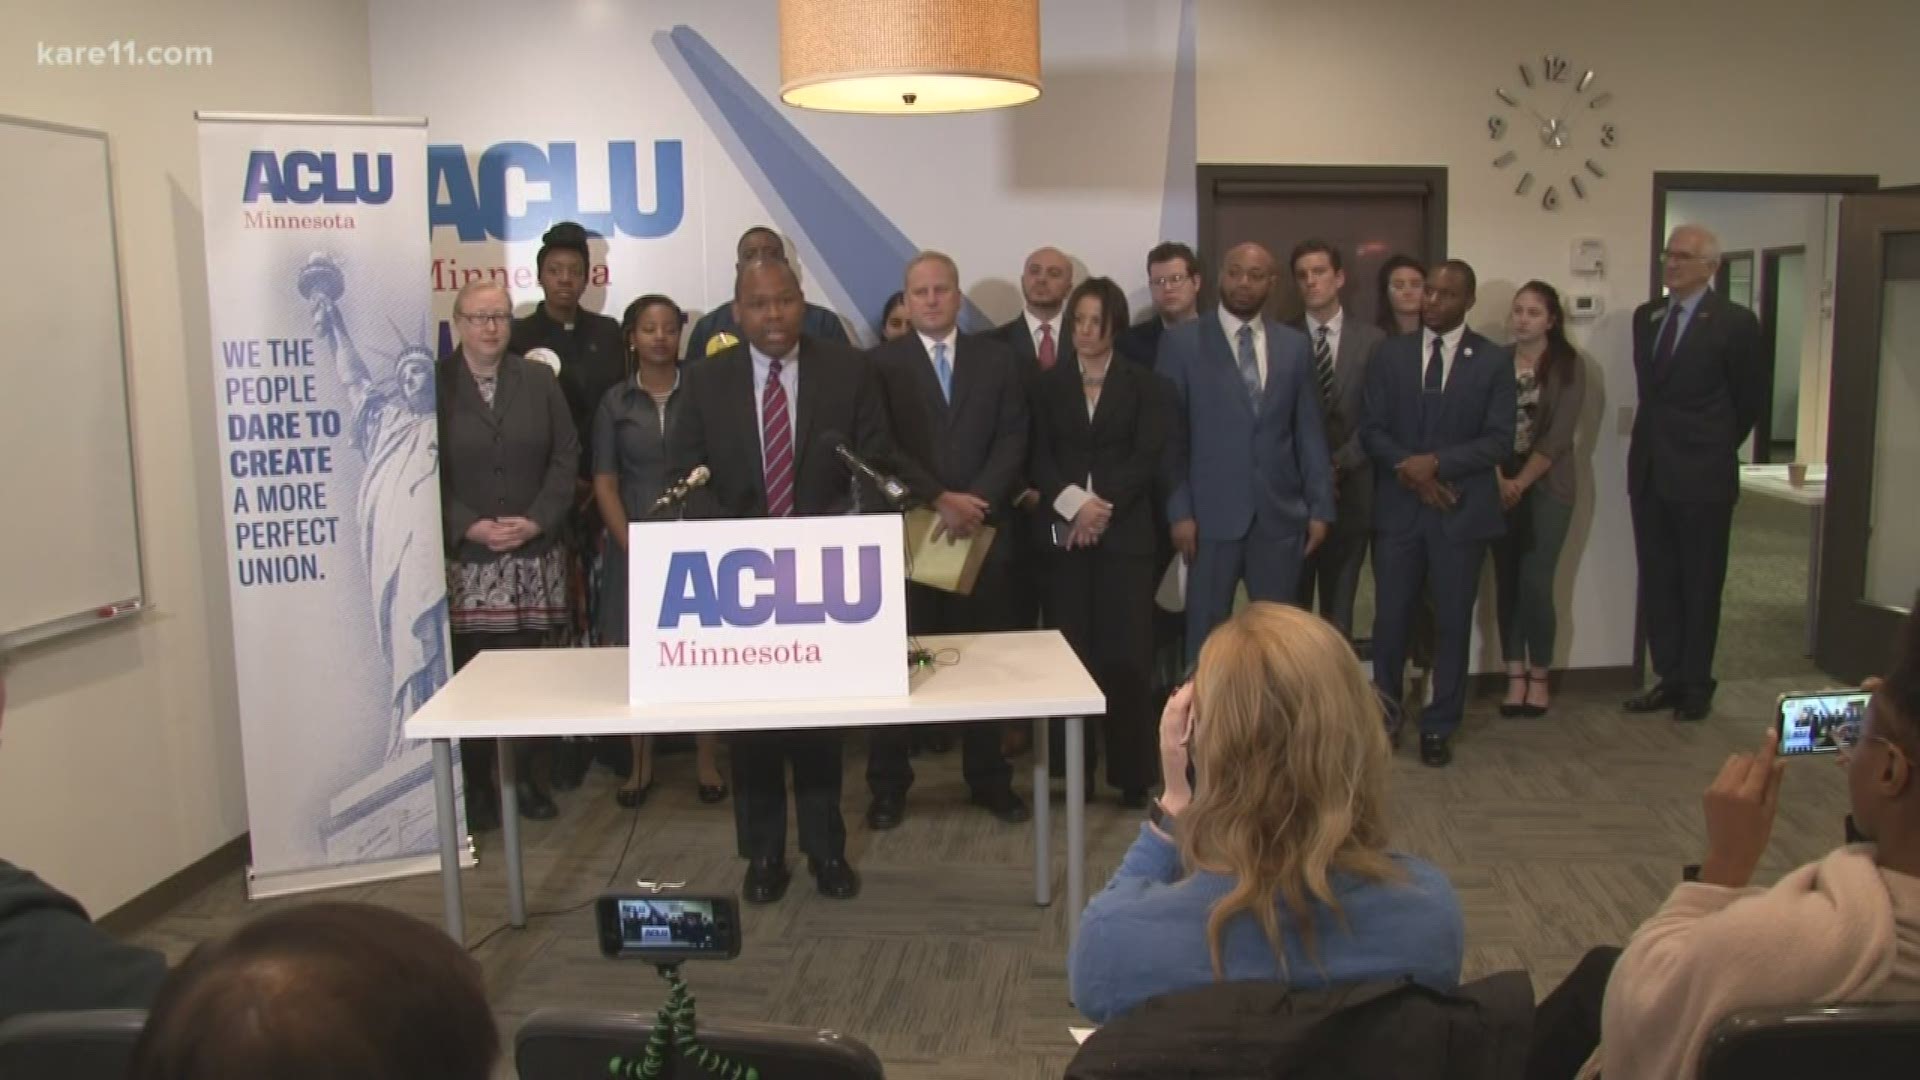 52,000 Minnesotans are currently not able to vote because they are on probation. The ACLU is pushing to change Minnesota law.